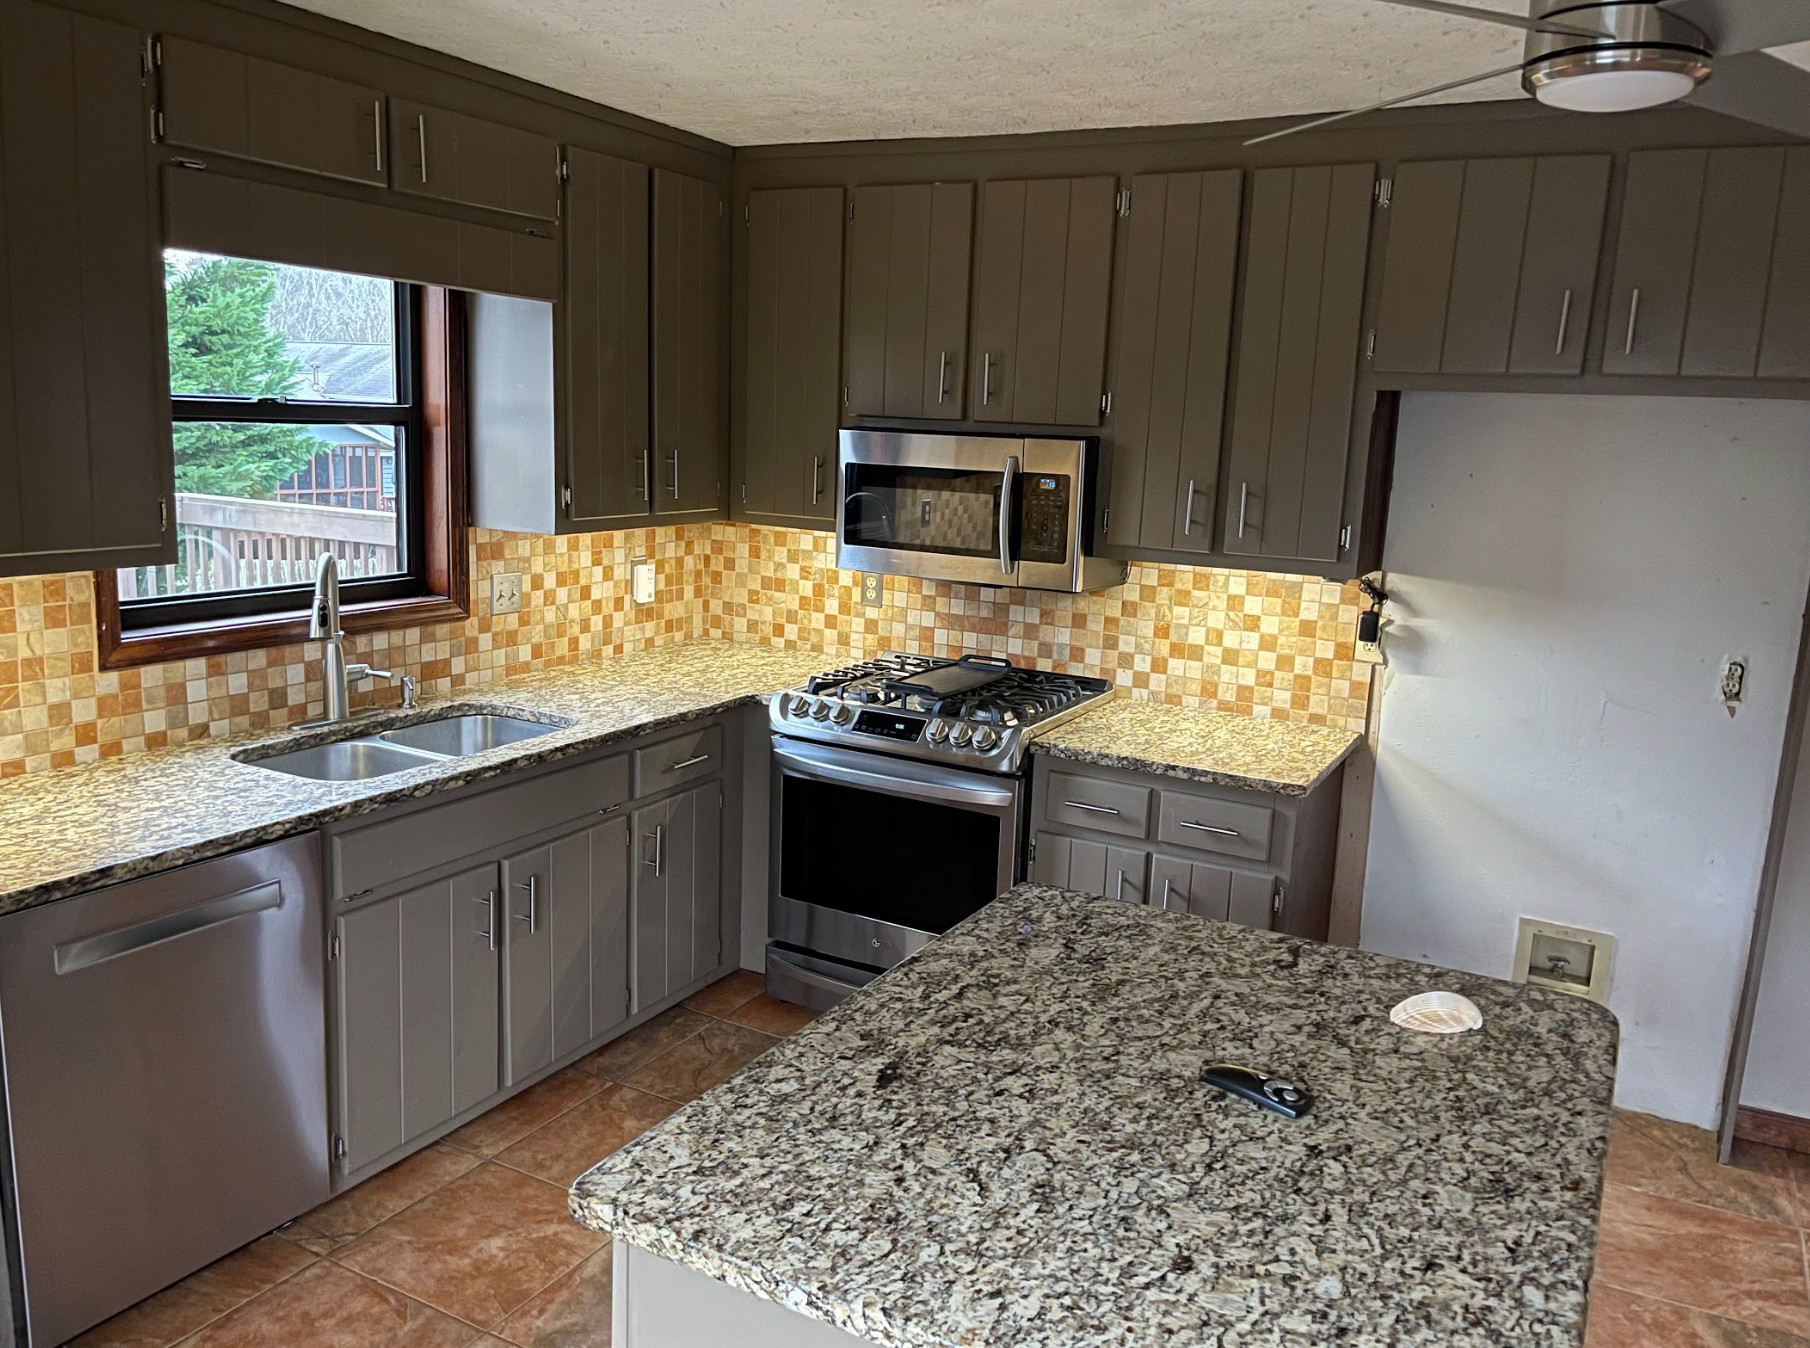 Kitchen and Dining Remodel